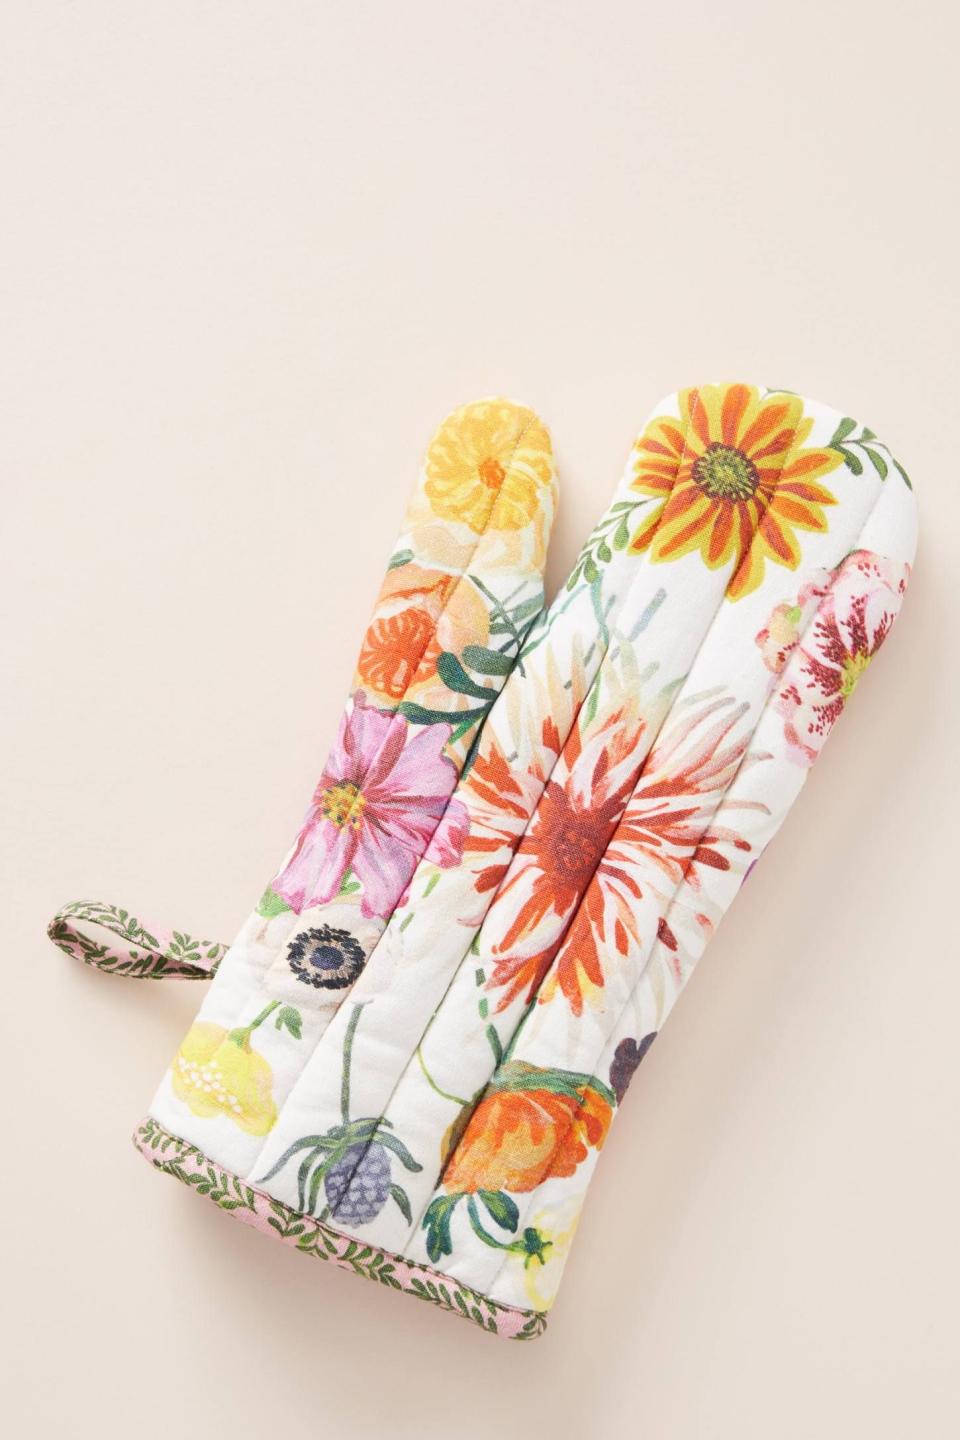 <p><strong>Nathalie Lete</strong></p><p>anthropologie.com</p><p><strong>$16.00</strong></p><p>Liven up their kitchen while keeping their hands safe with this fun oven mitt. Just try not to go overboard and buy one for every single friend. 😂</p>